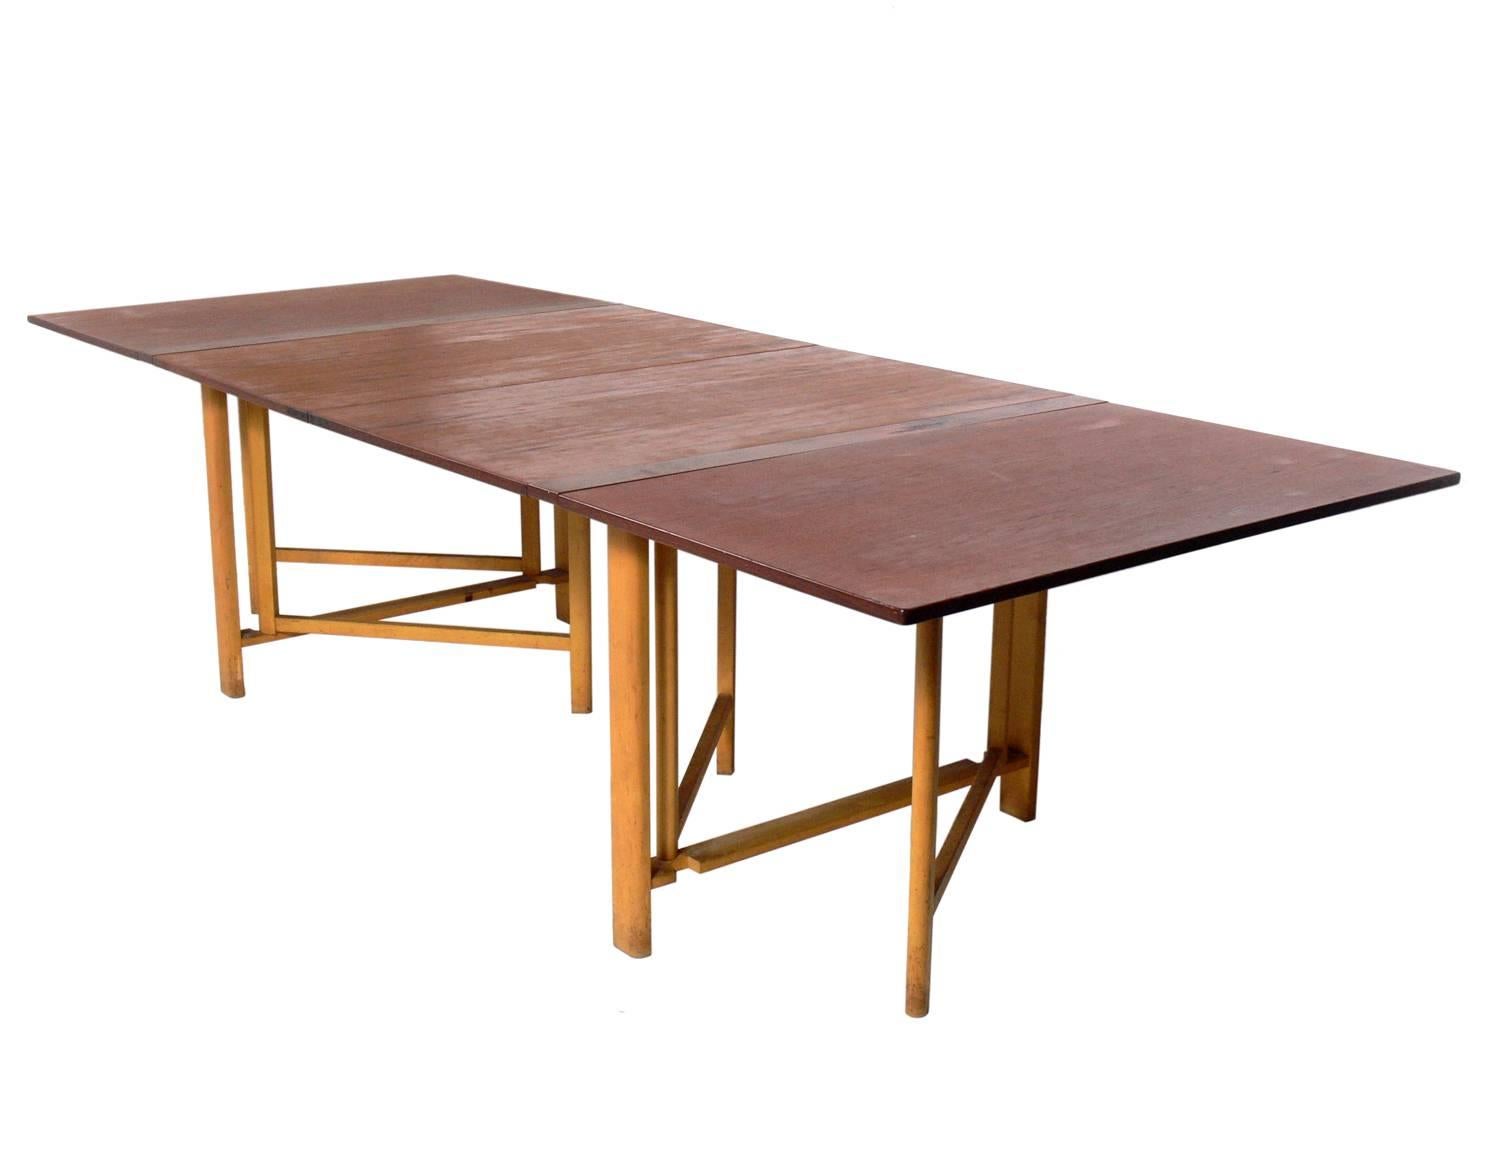 Ingenious Folding Dining Table, designed by Bruno Mathsson, probably made by Firma Karl Mathsson, Sweden, unsigned, circa 1950s. This table is currently being refinished. The price noted below includes refinishing. The table features four 26-inch